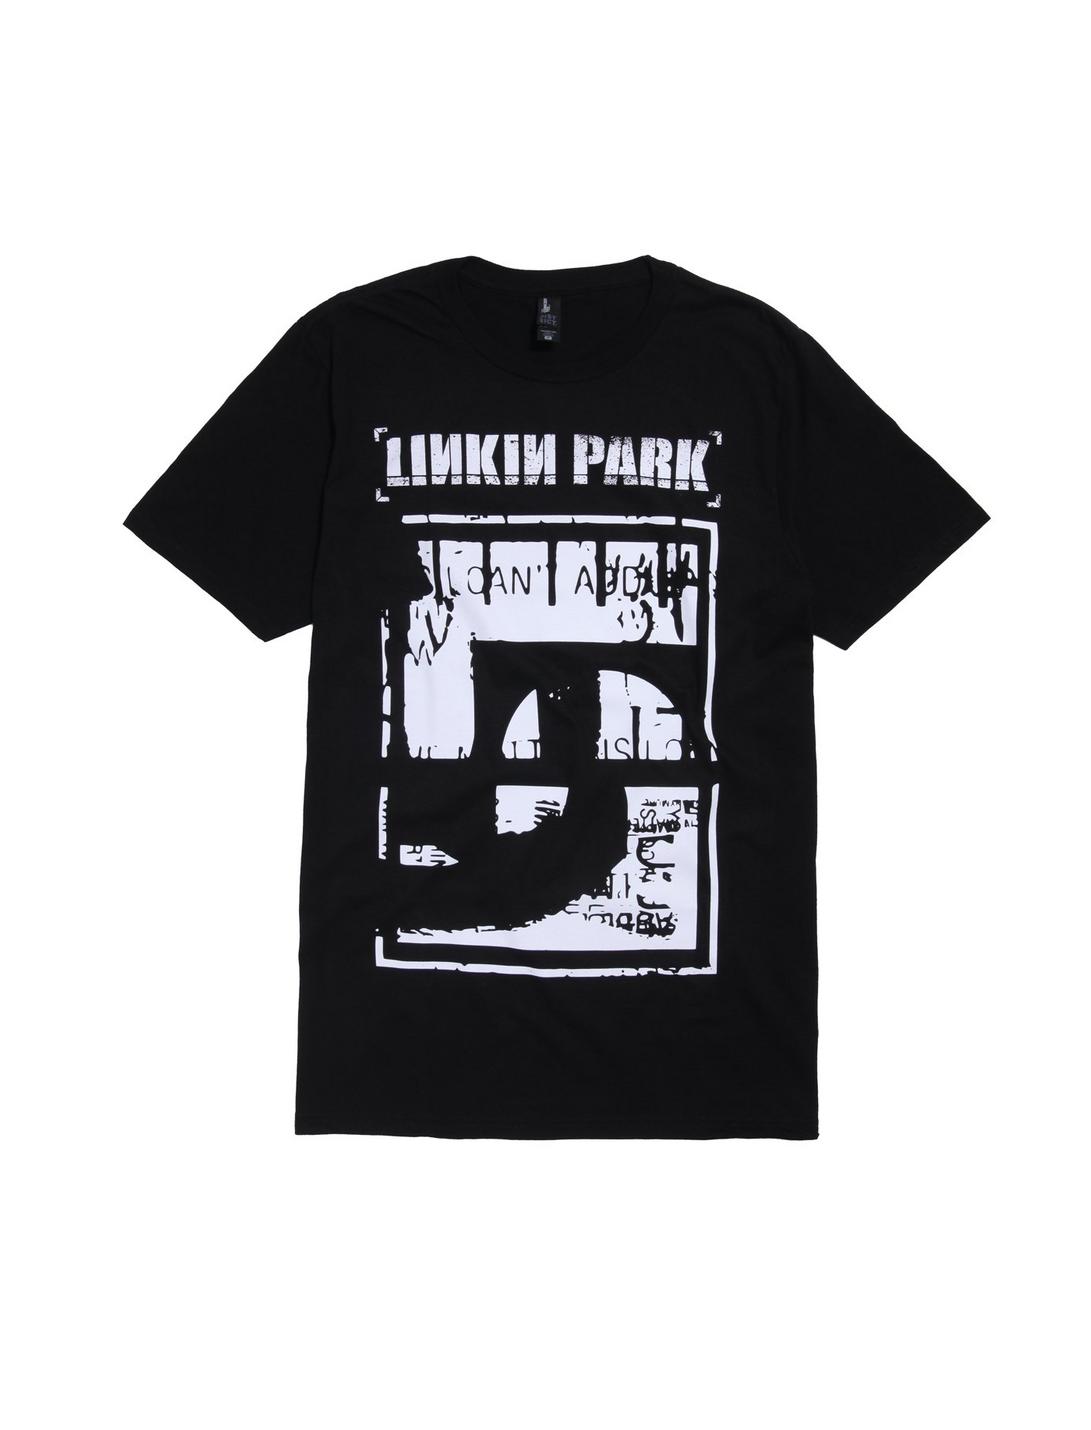 Stencil Logo T-shirt NEW Licensed Band Merch ALL SIZES OFFICIAL Linkin Park 